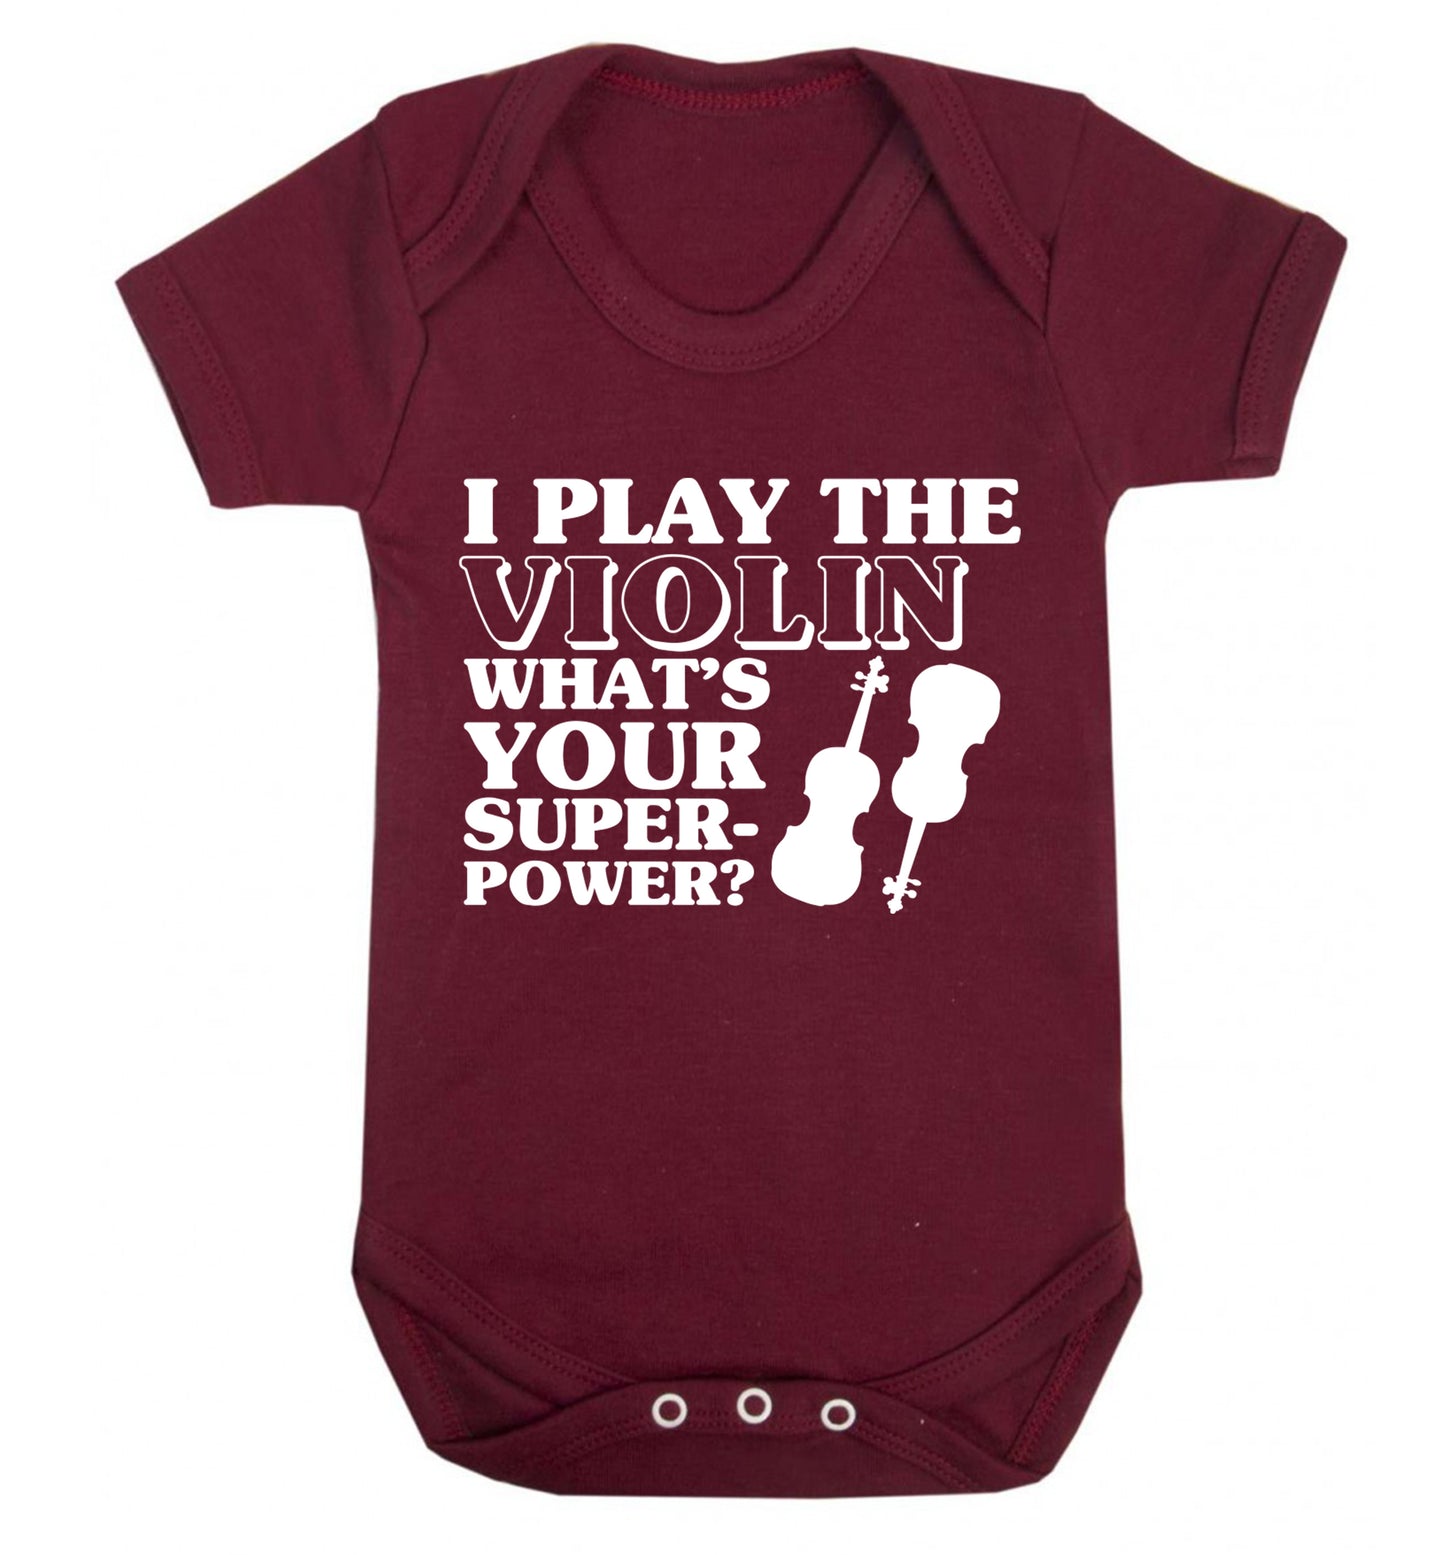 I Play Violin What's Your Superpower? Baby Vest maroon 18-24 months